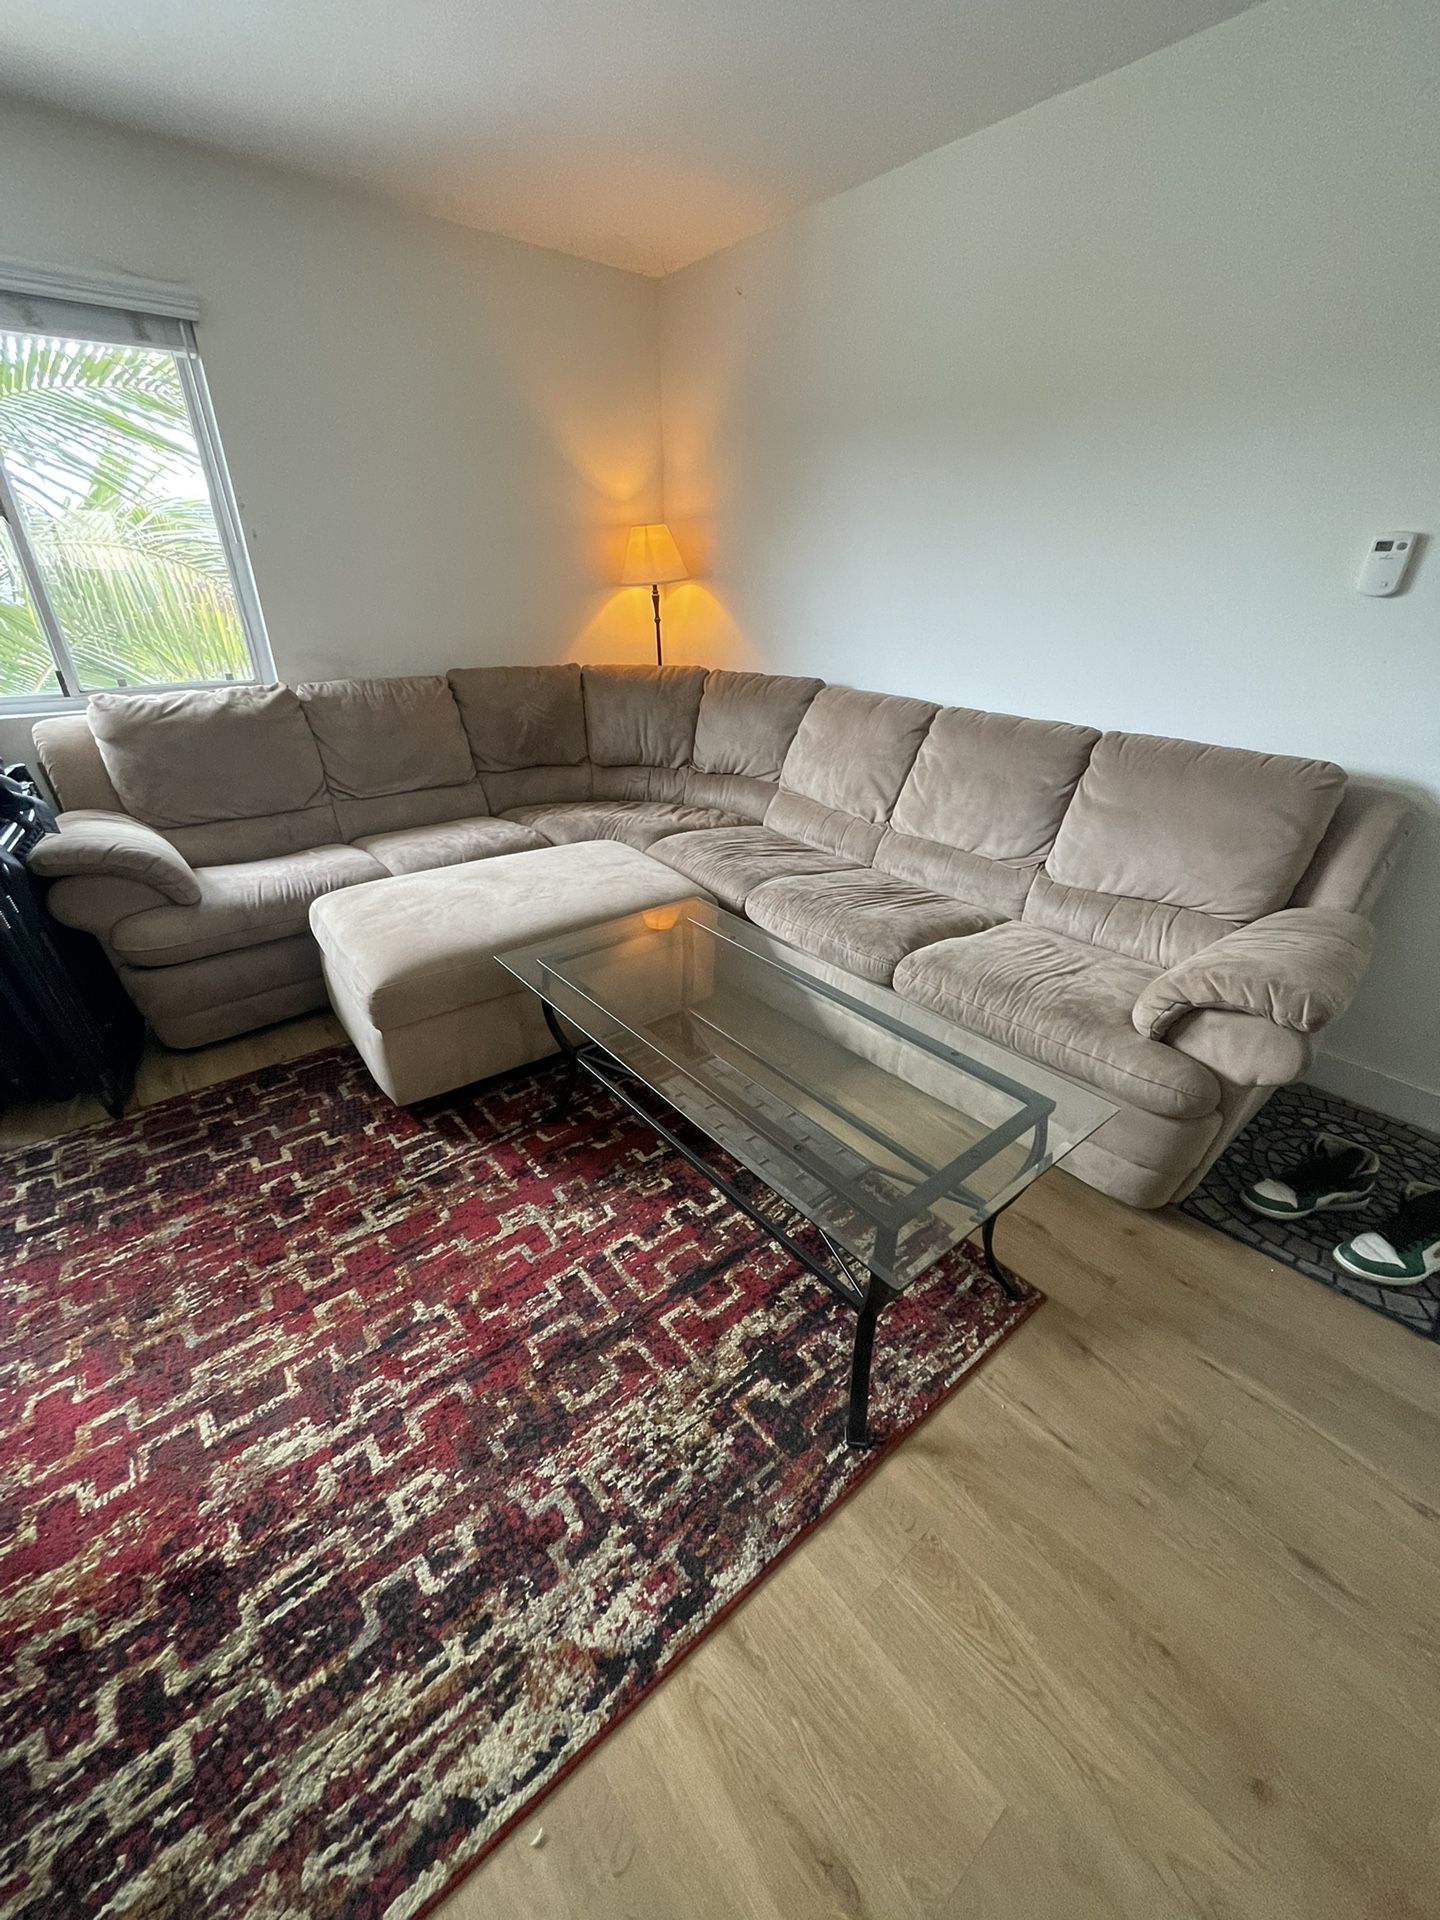 Large 3-piece Sectional Couch